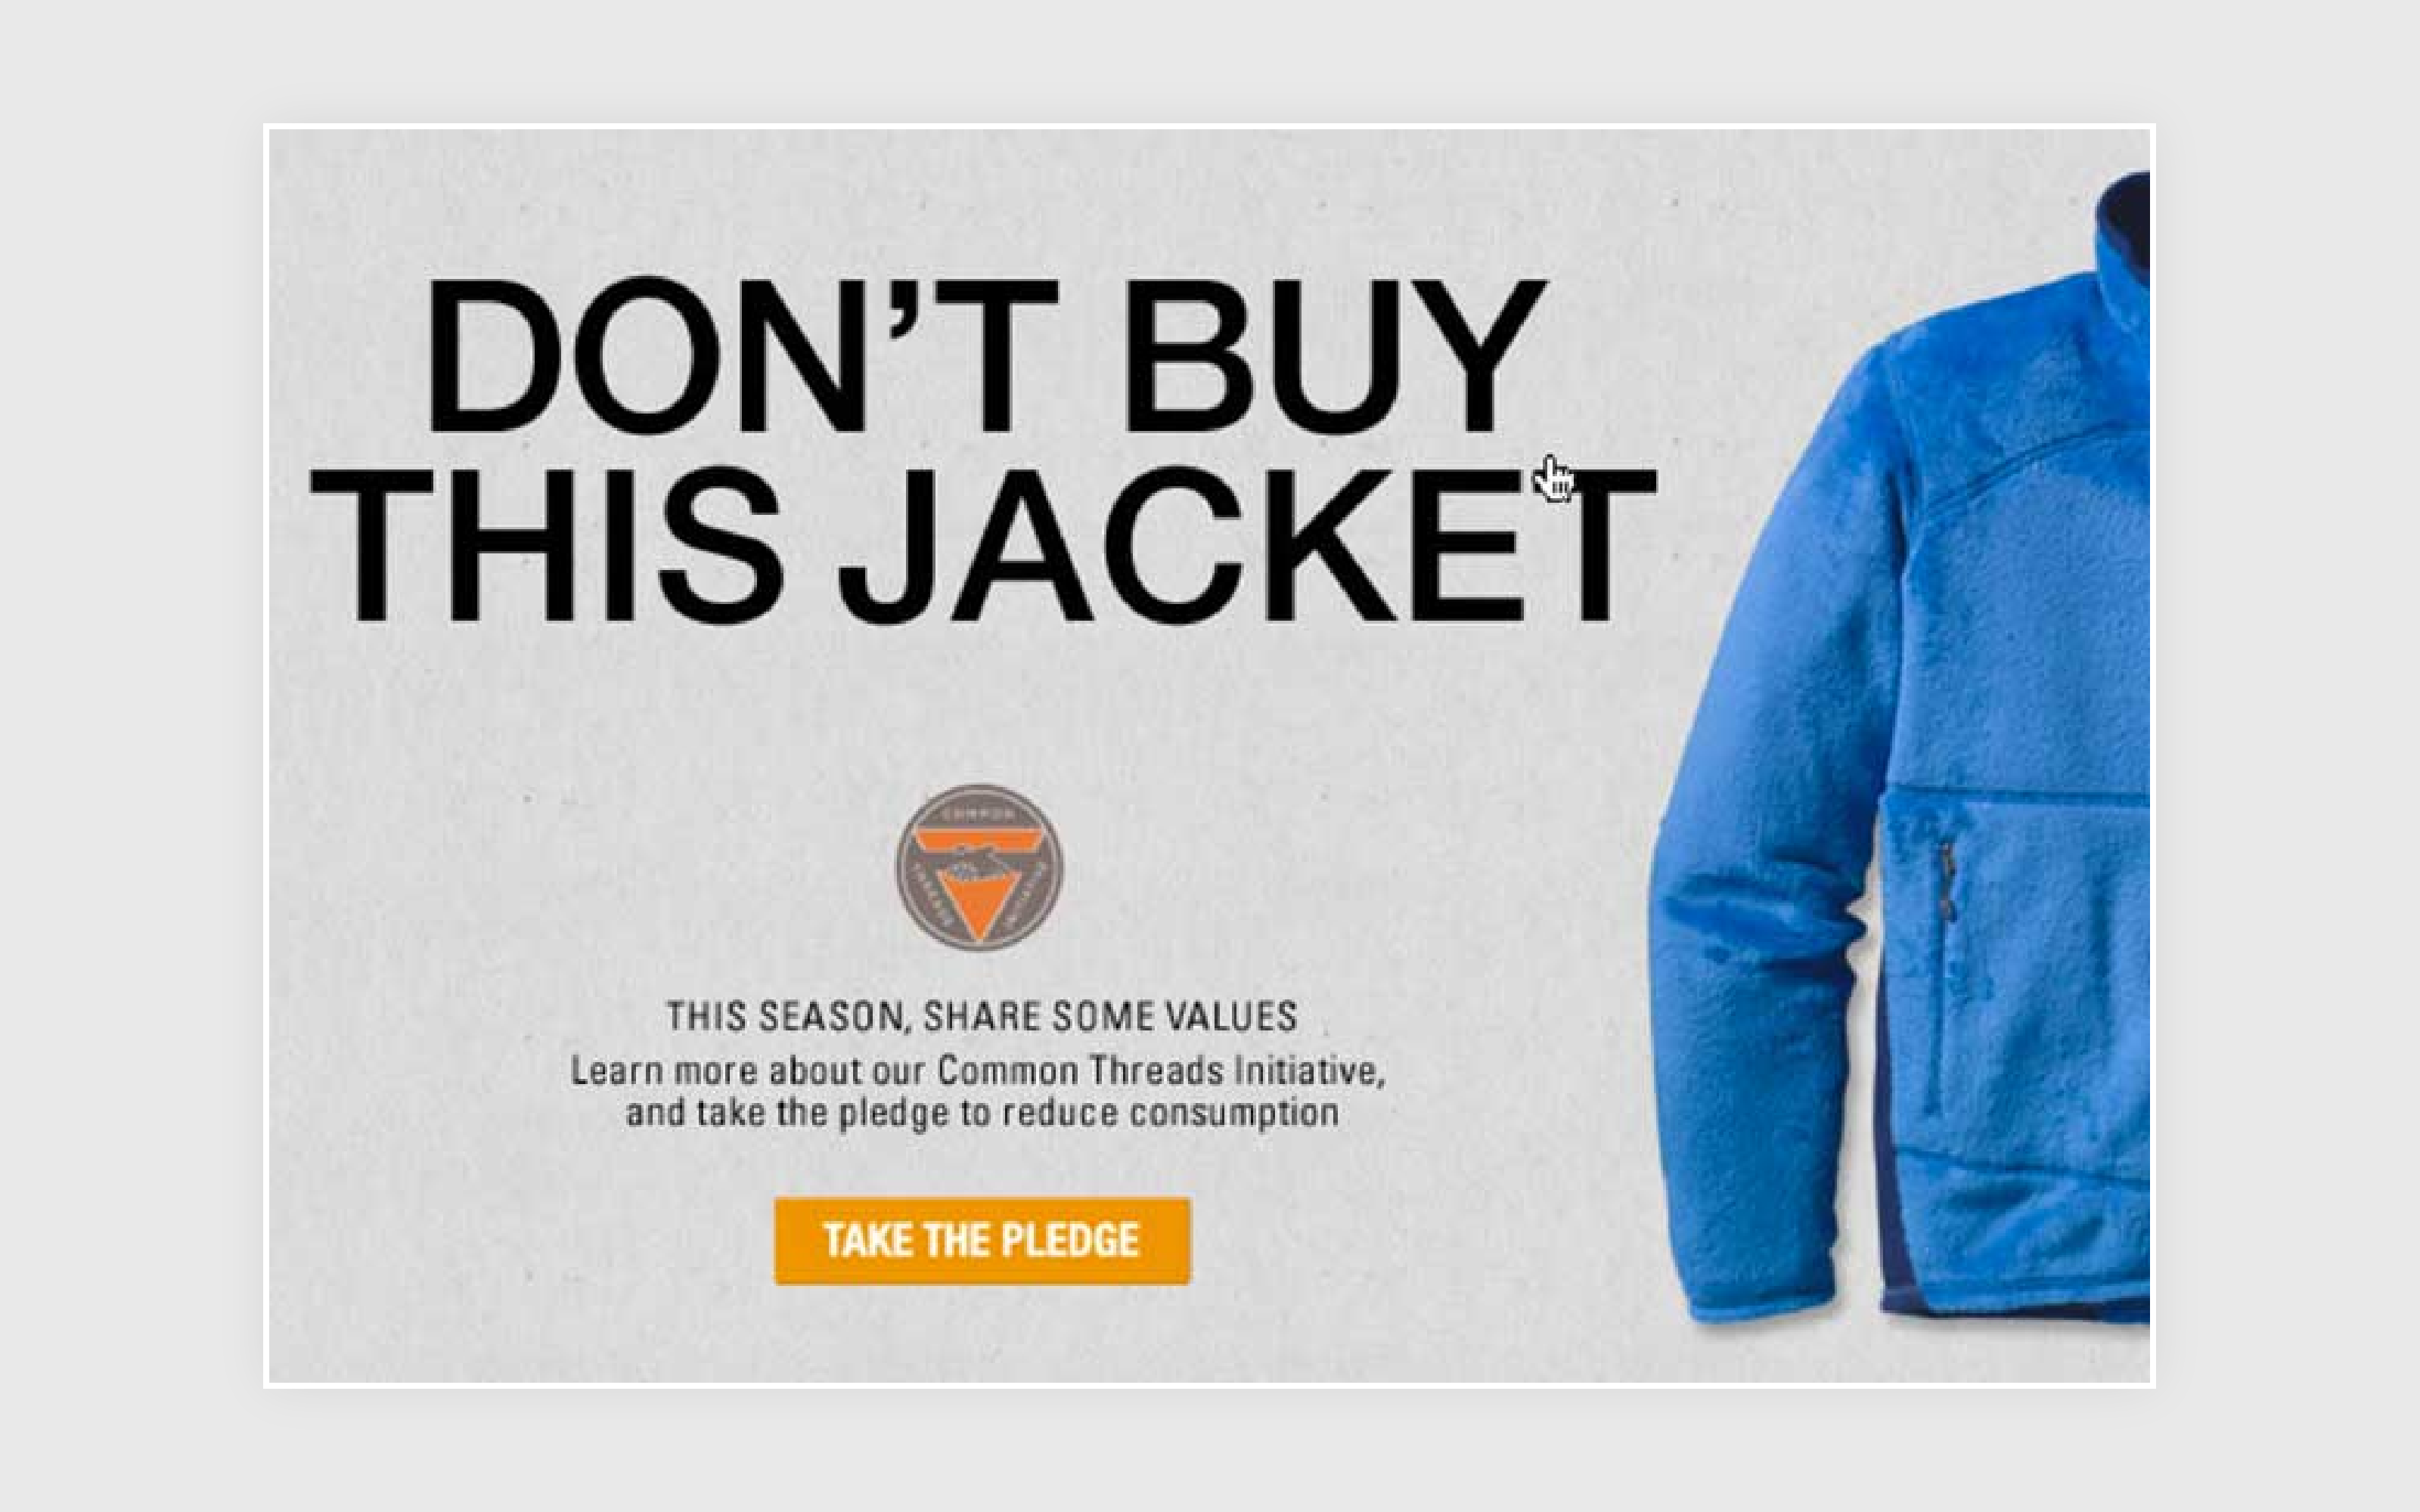 "Don't buy this jacket" ad from Patagonia